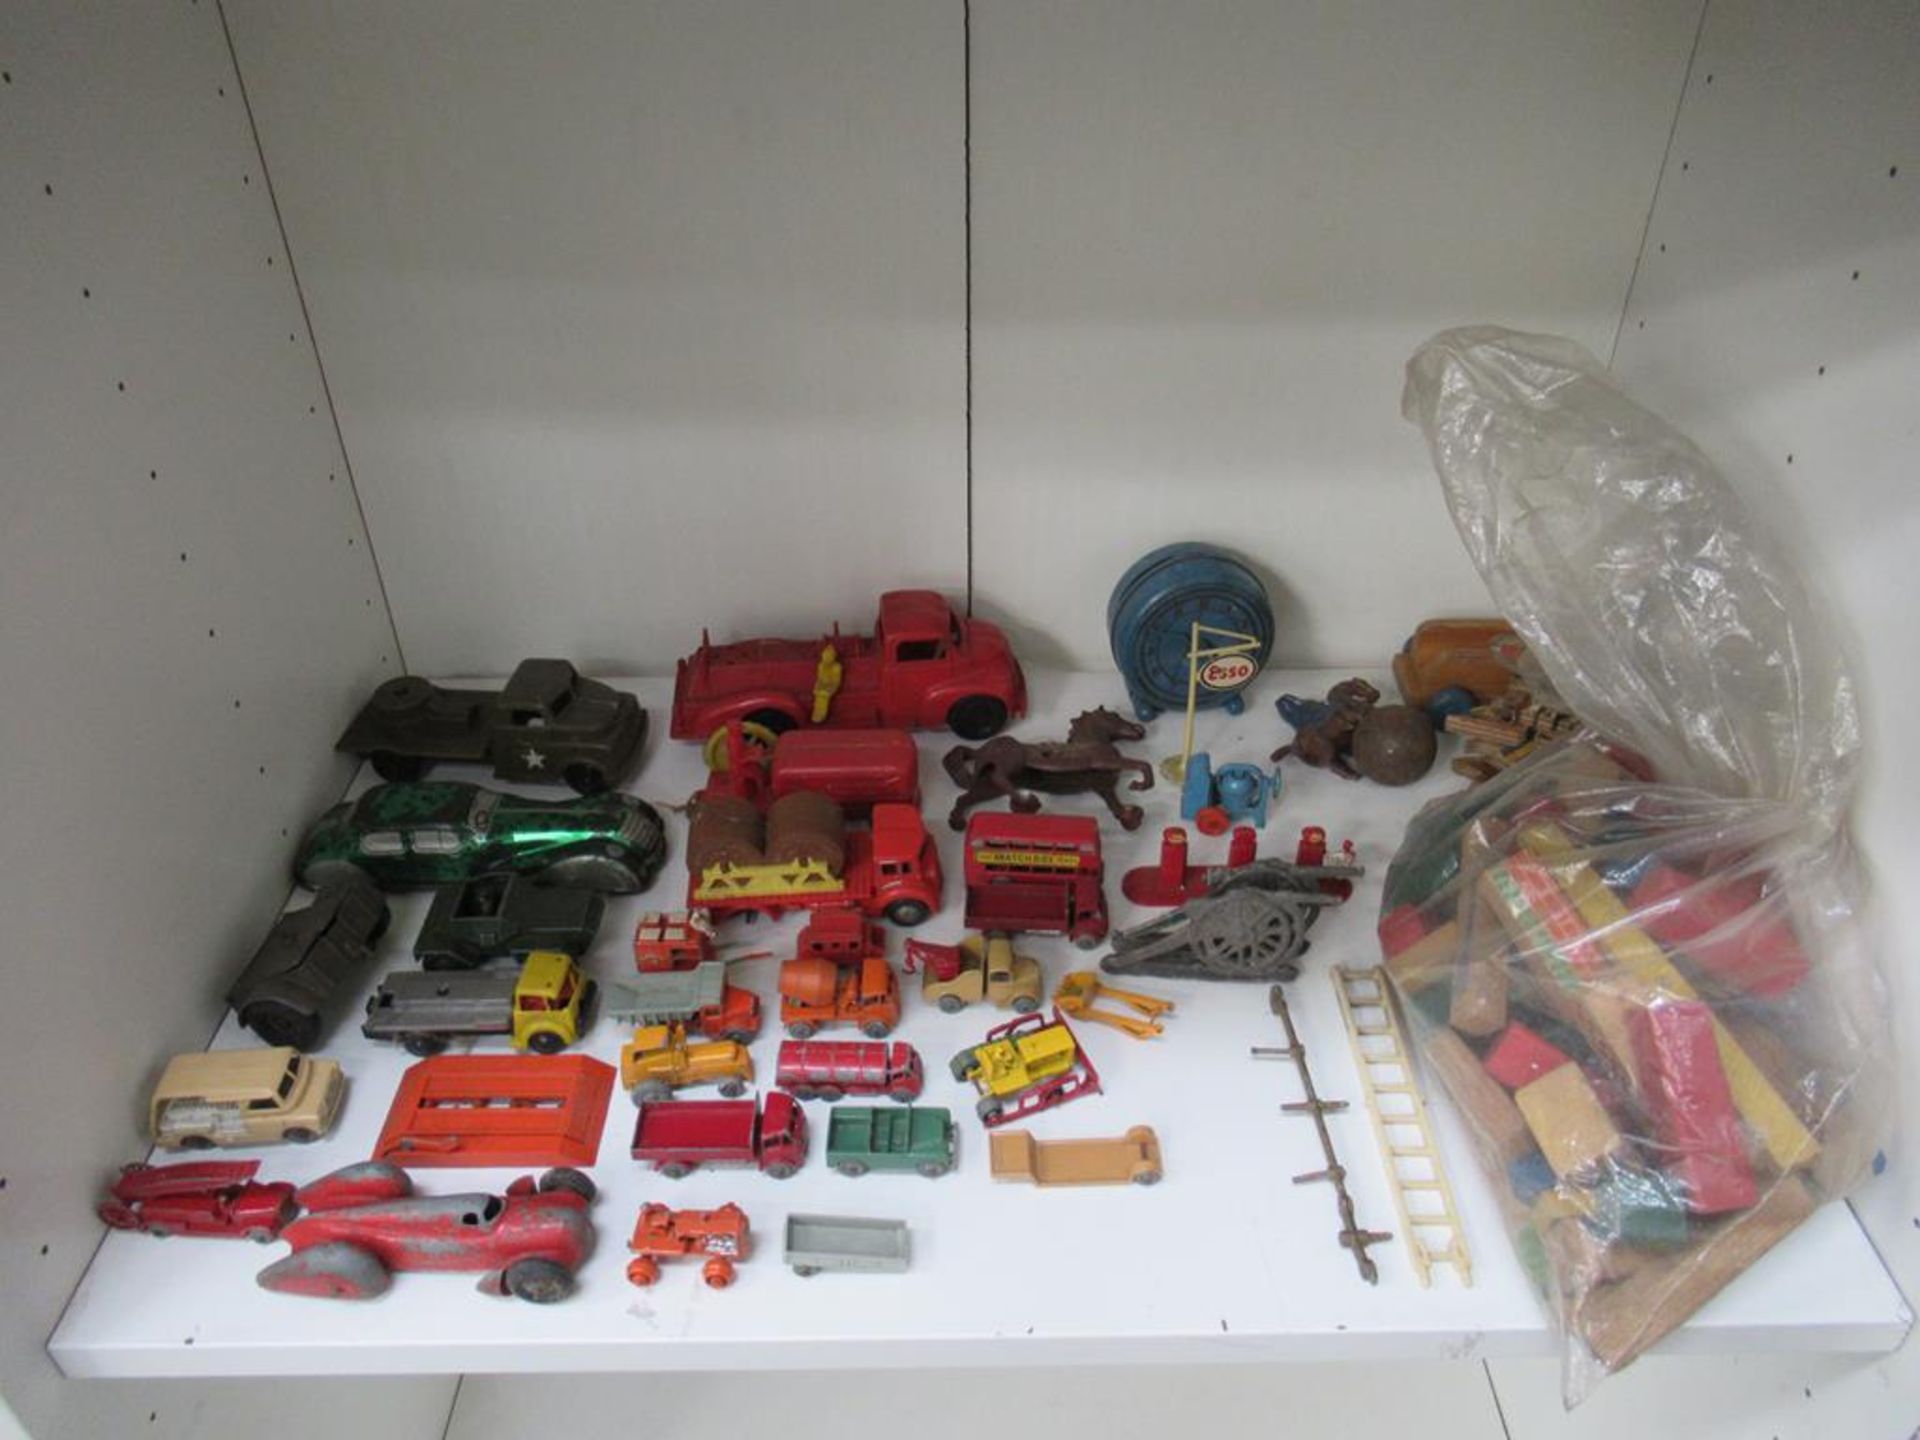 2x Shelves of Assorted Vintage Toys, including diecast vehicles, trains, cigarette cards etc. - Image 3 of 3